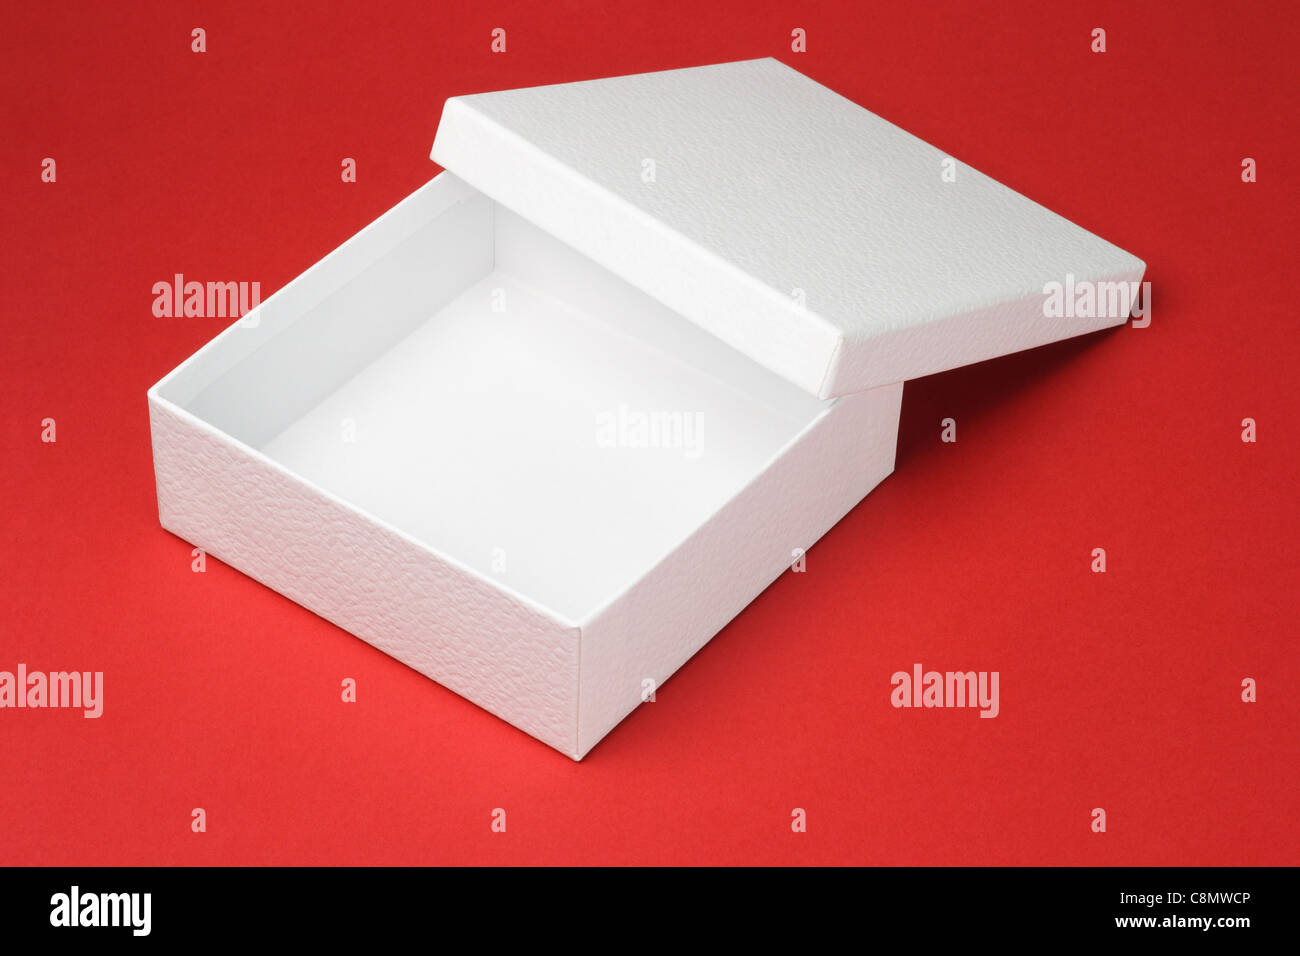 Open and empty white gift box on red background Stock Photo